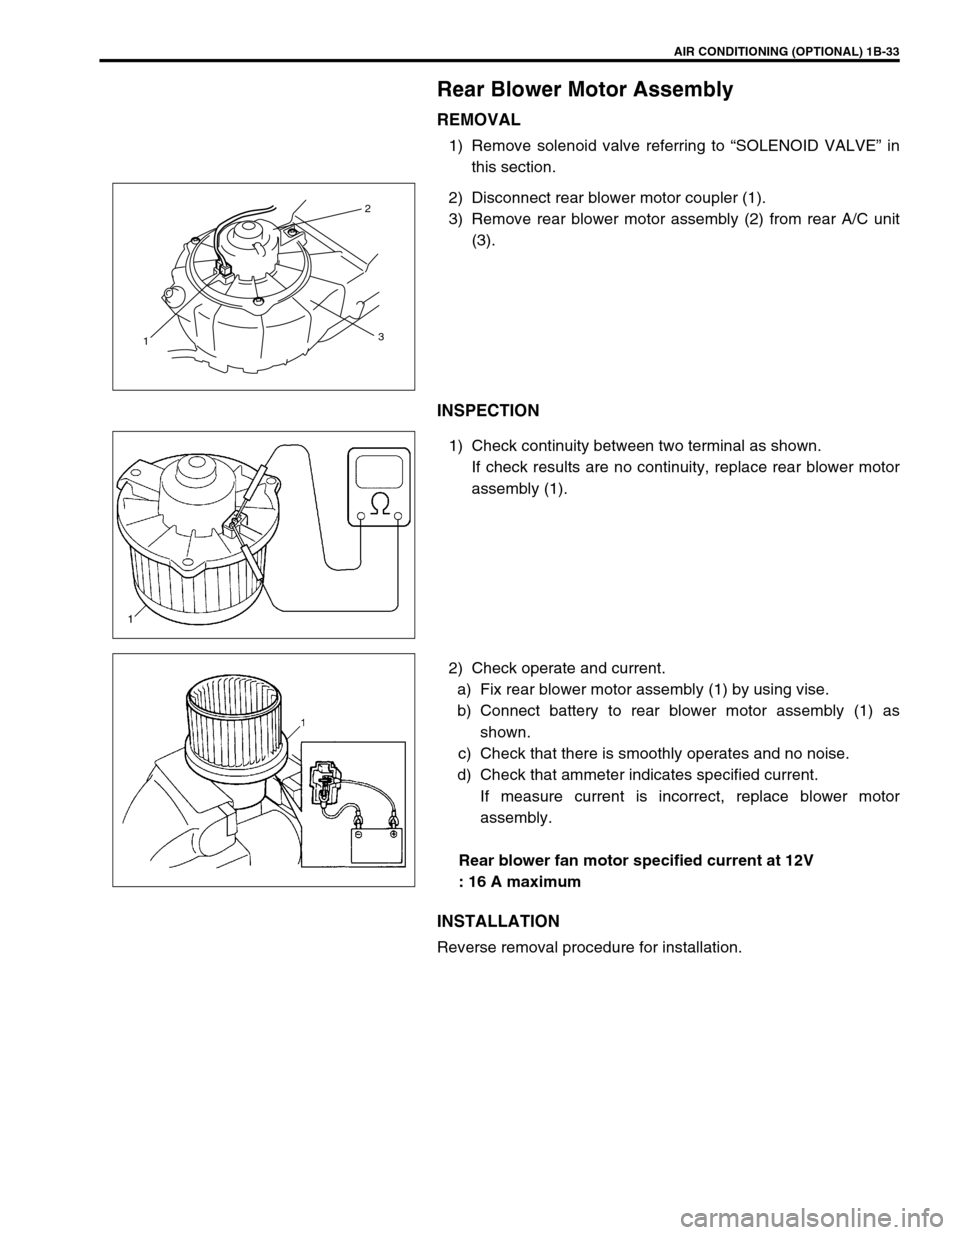 SUZUKI GRAND VITARA 1999 2.G Owners Manual AIR CONDITIONING (OPTIONAL) 1B-33
Rear Blower Motor Assembly
REMOVAL
1) Remove solenoid valve referring to “SOLENOID VALVE” in
this section.
2) Disconnect rear blower motor coupler (1).
3) Remove 